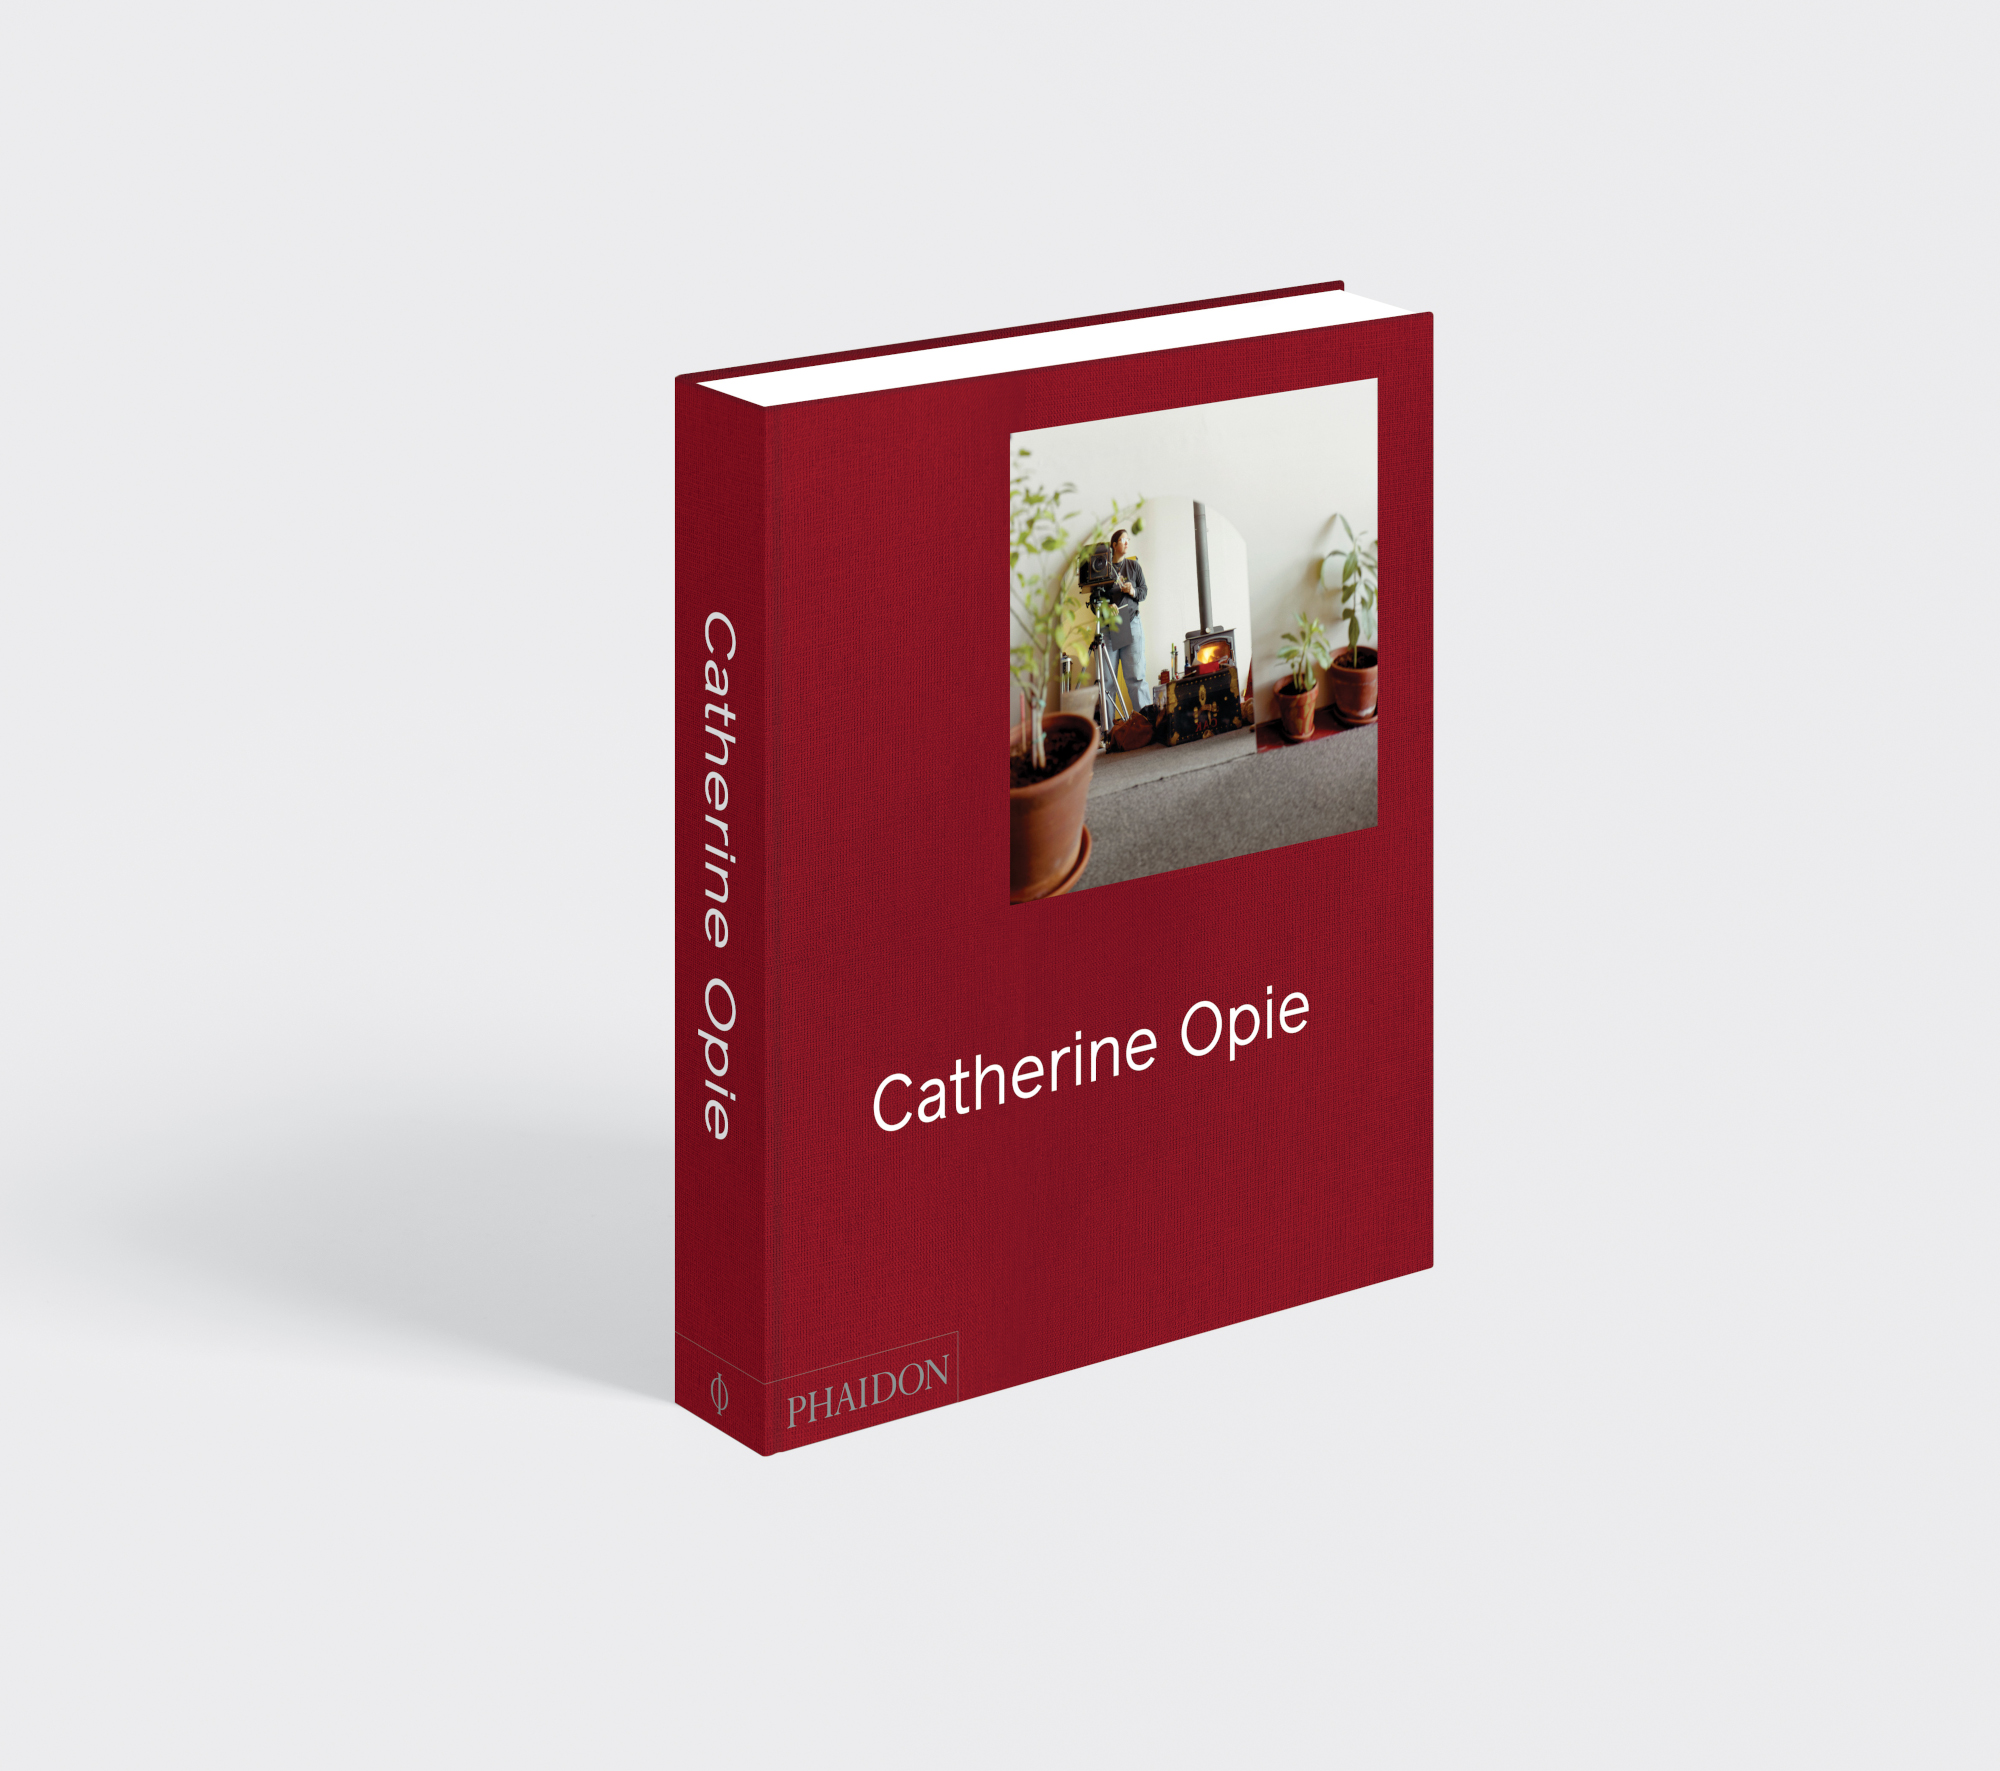 All you need to know about Catherine Opie